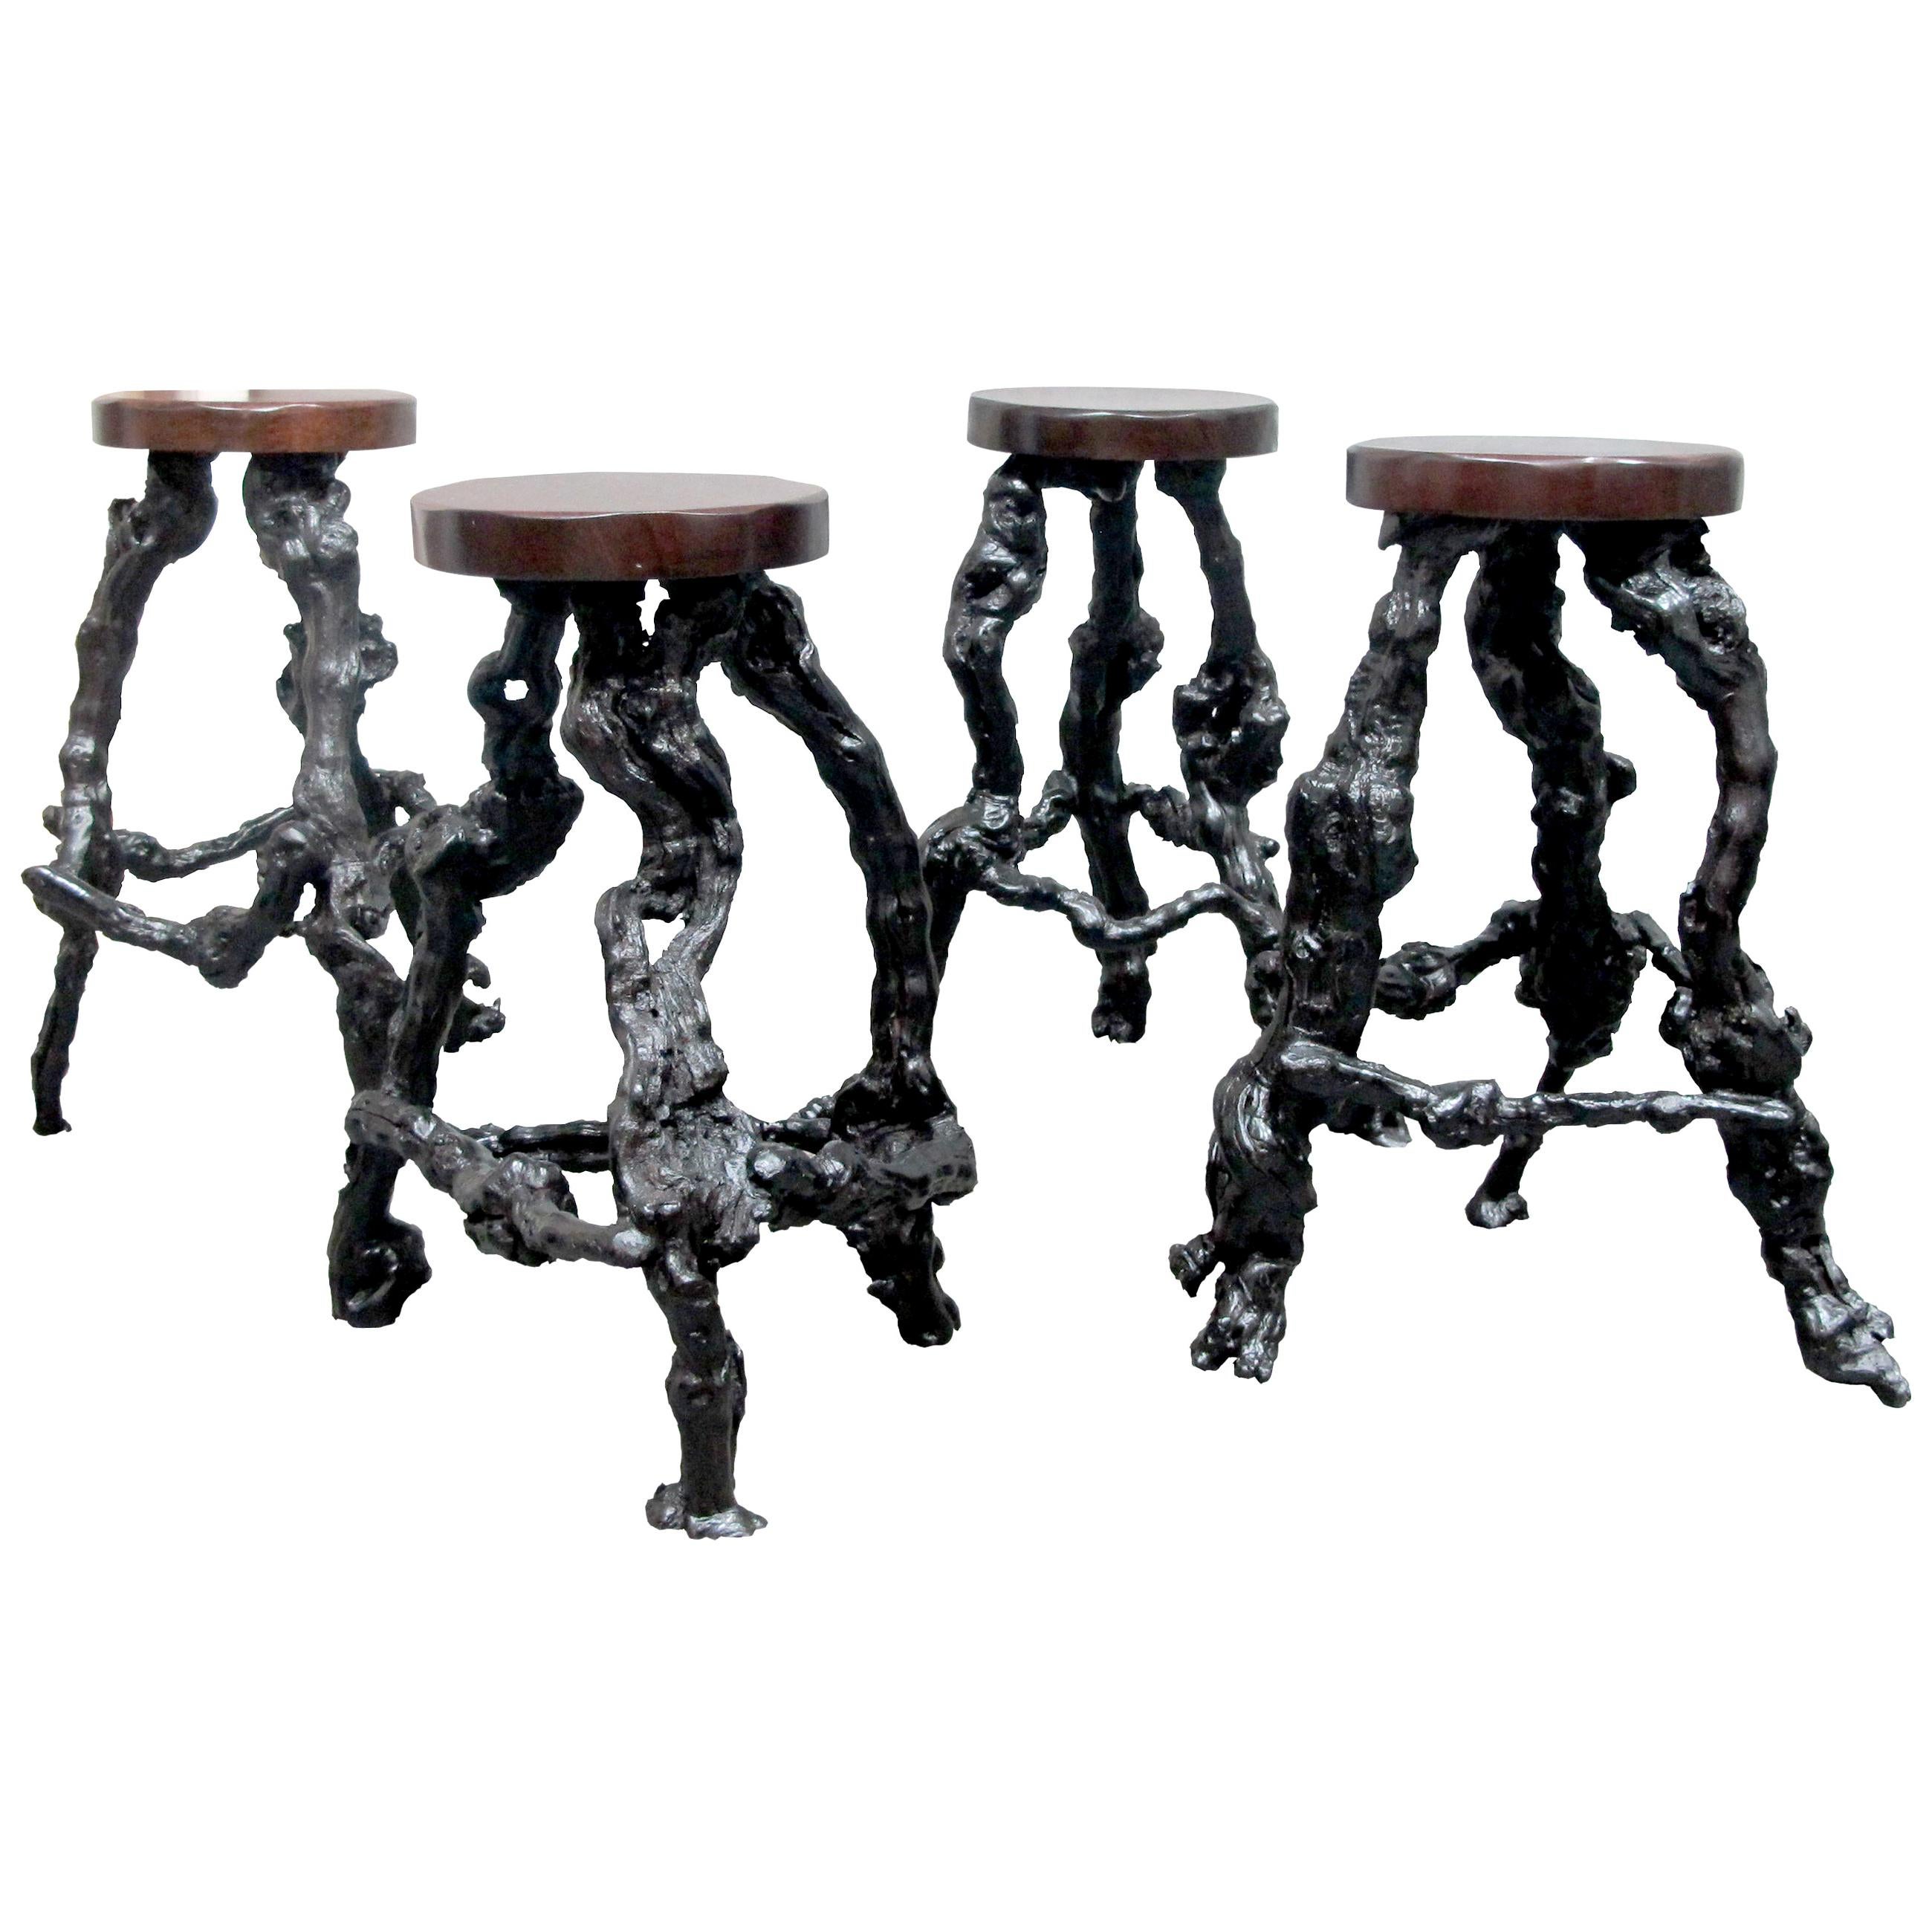 Set of 4 Midcentury French Twisted Grapevine Handcrafted Root Bar Stools